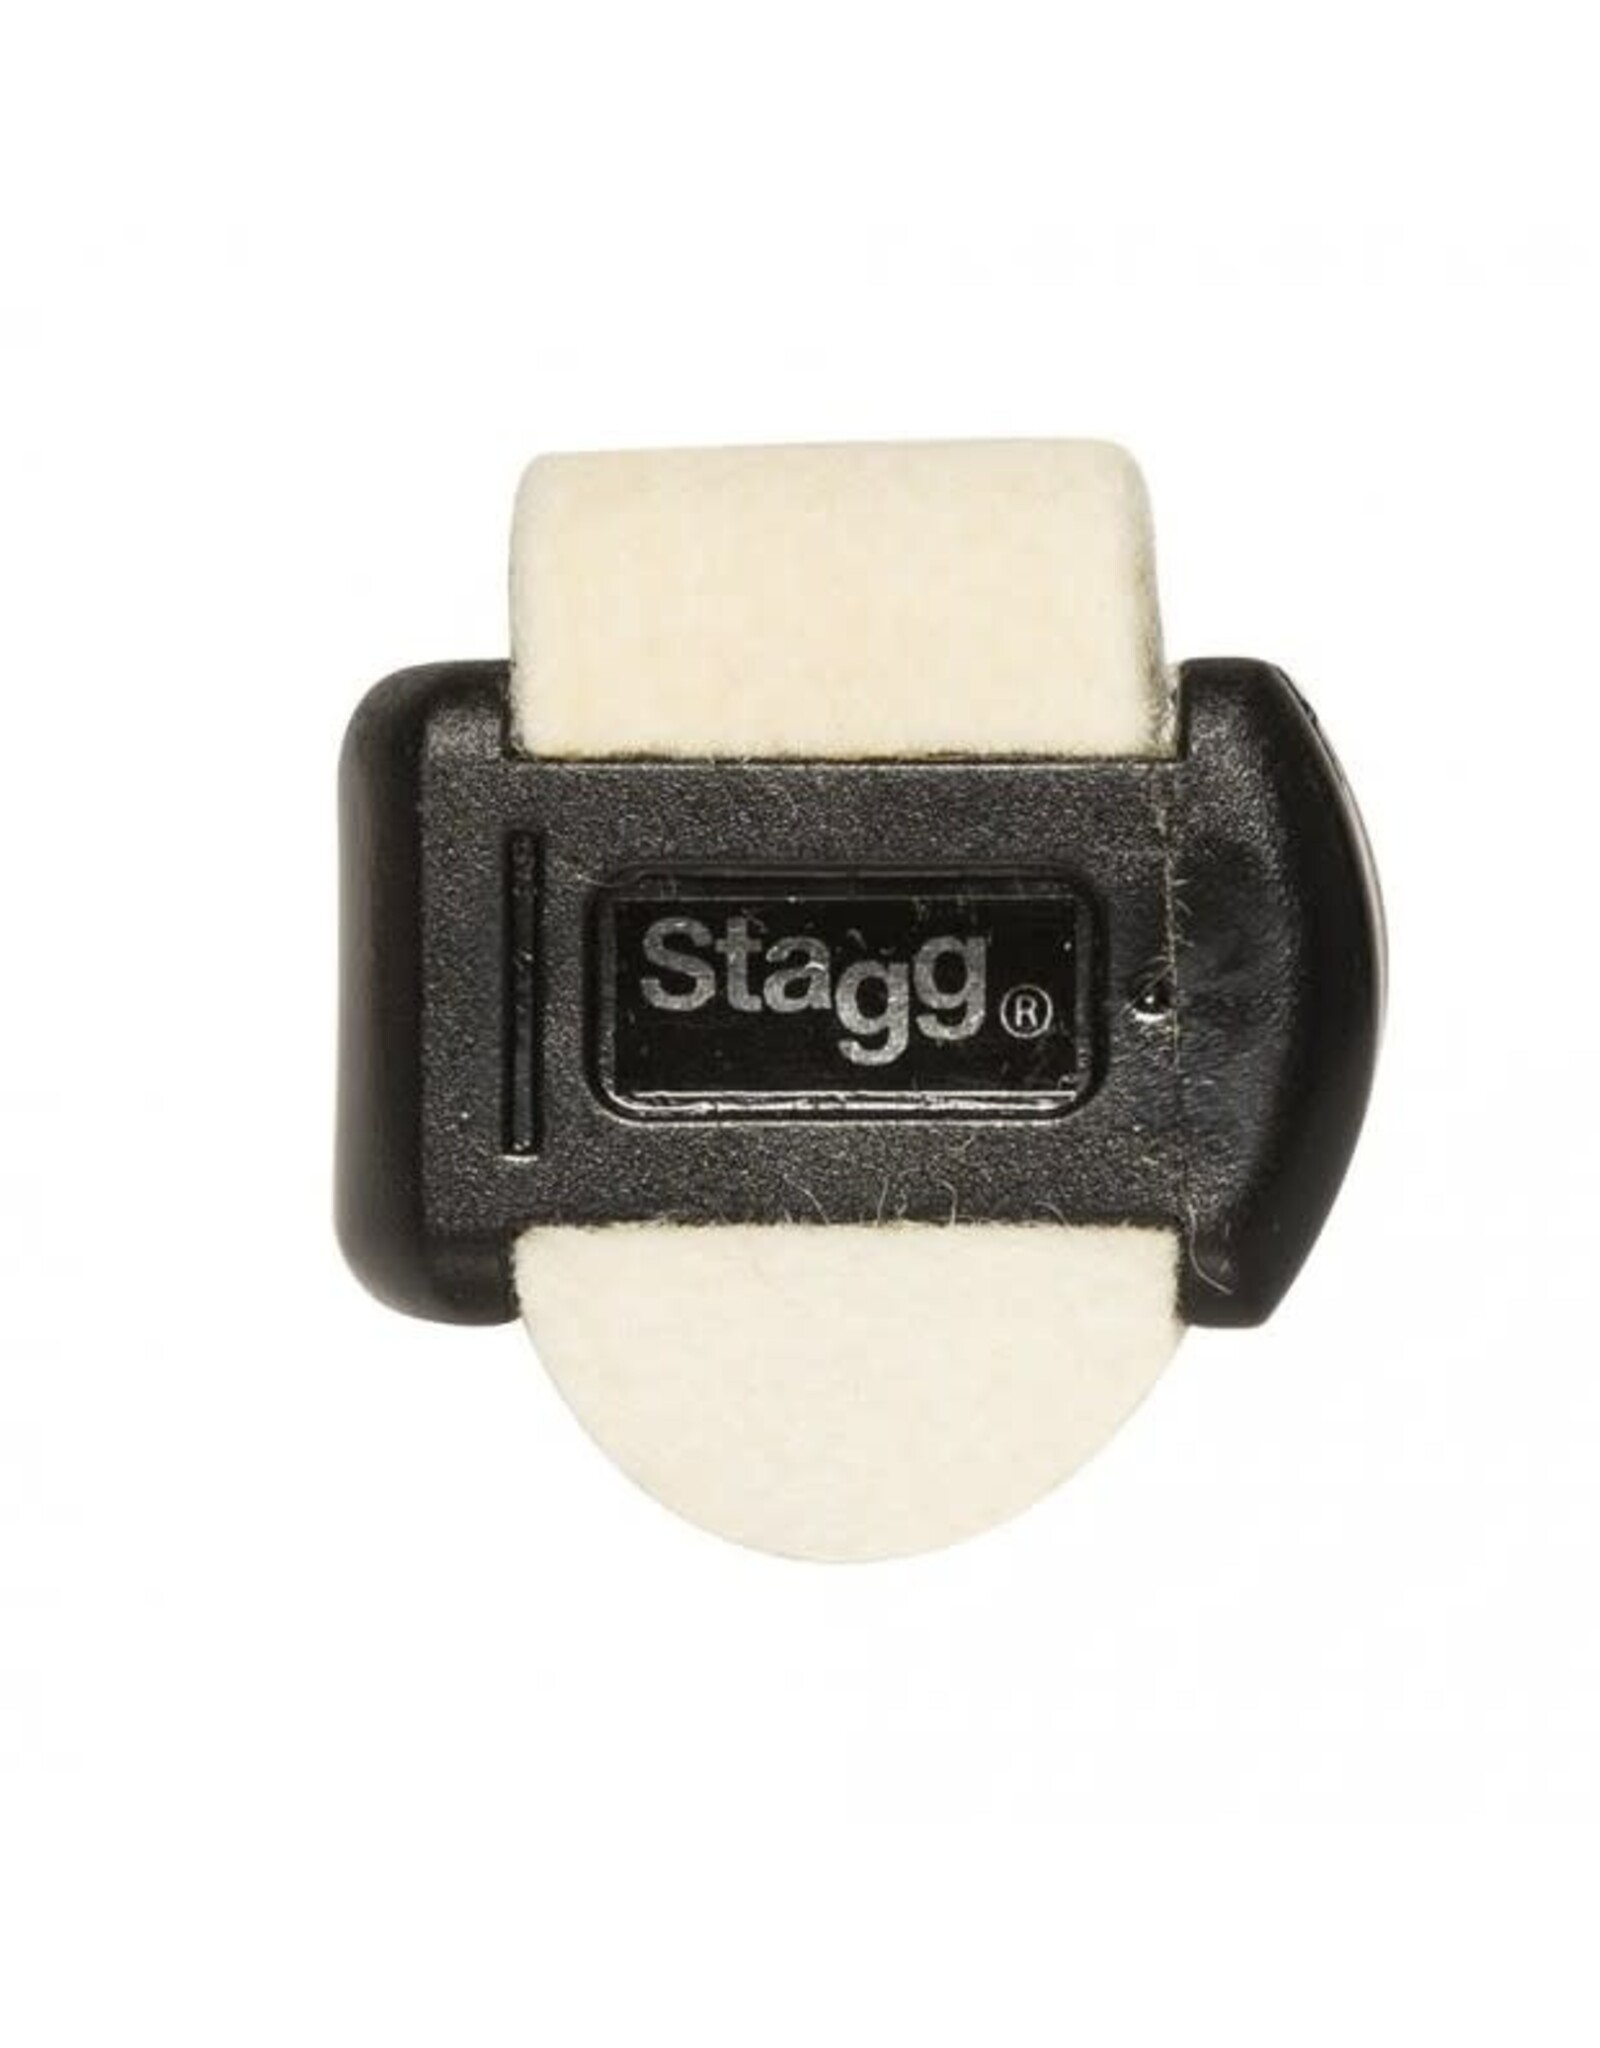 Stagg Stagg Bass Drum Pedal Beater, 52 Series